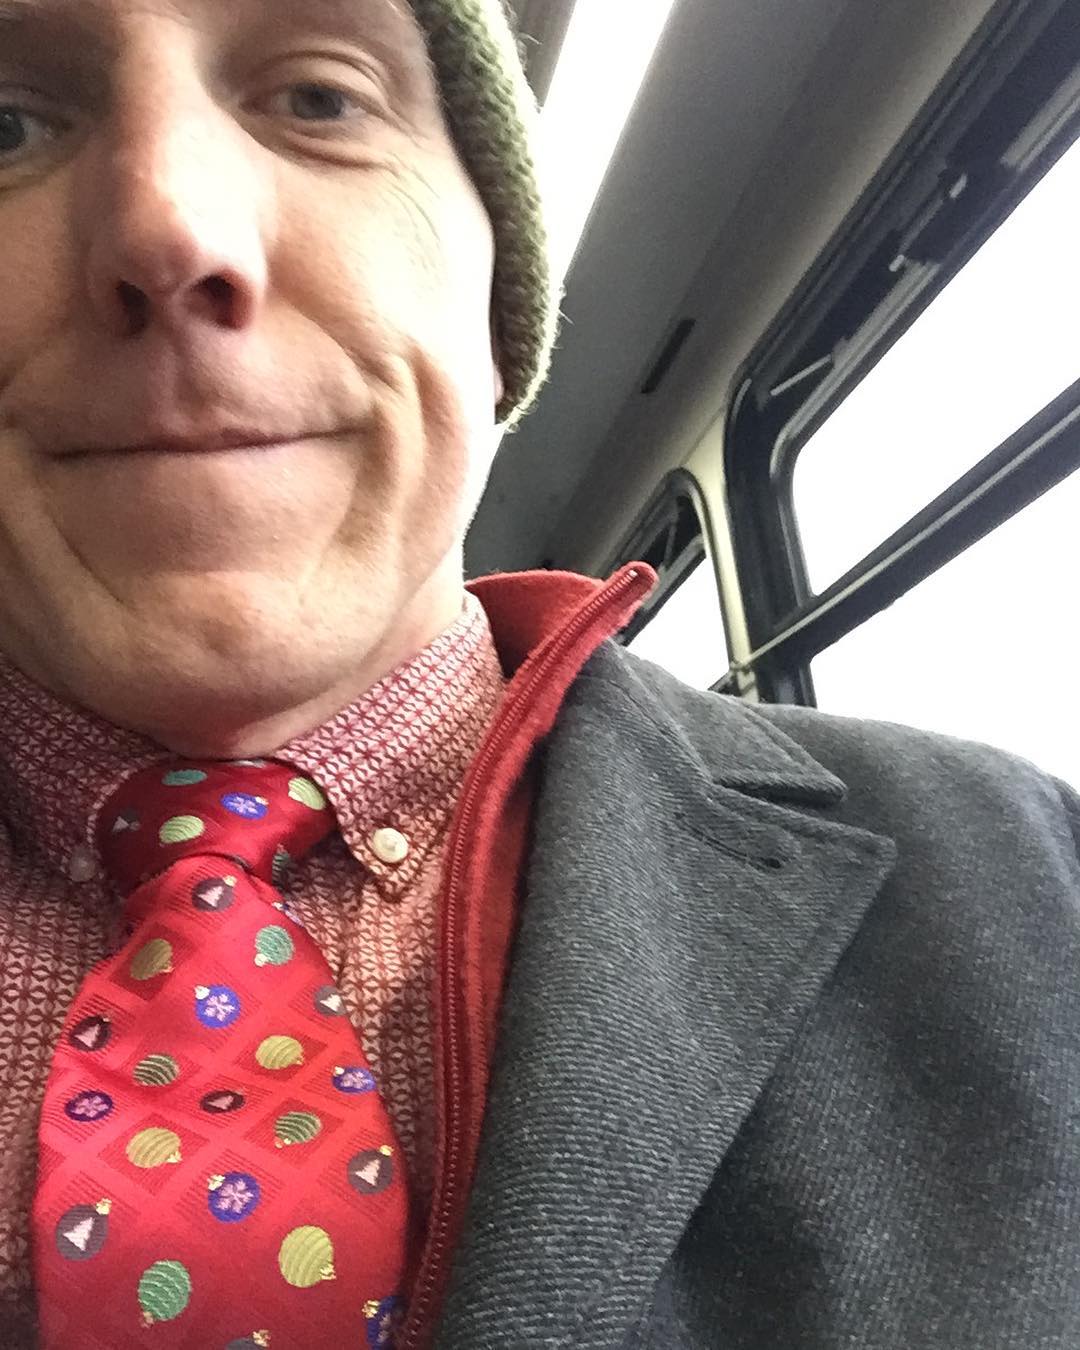 Headed to first holiday party @davidsoncollege prez’s house so thought I’d wear a festive #tiedayfriday #ftw